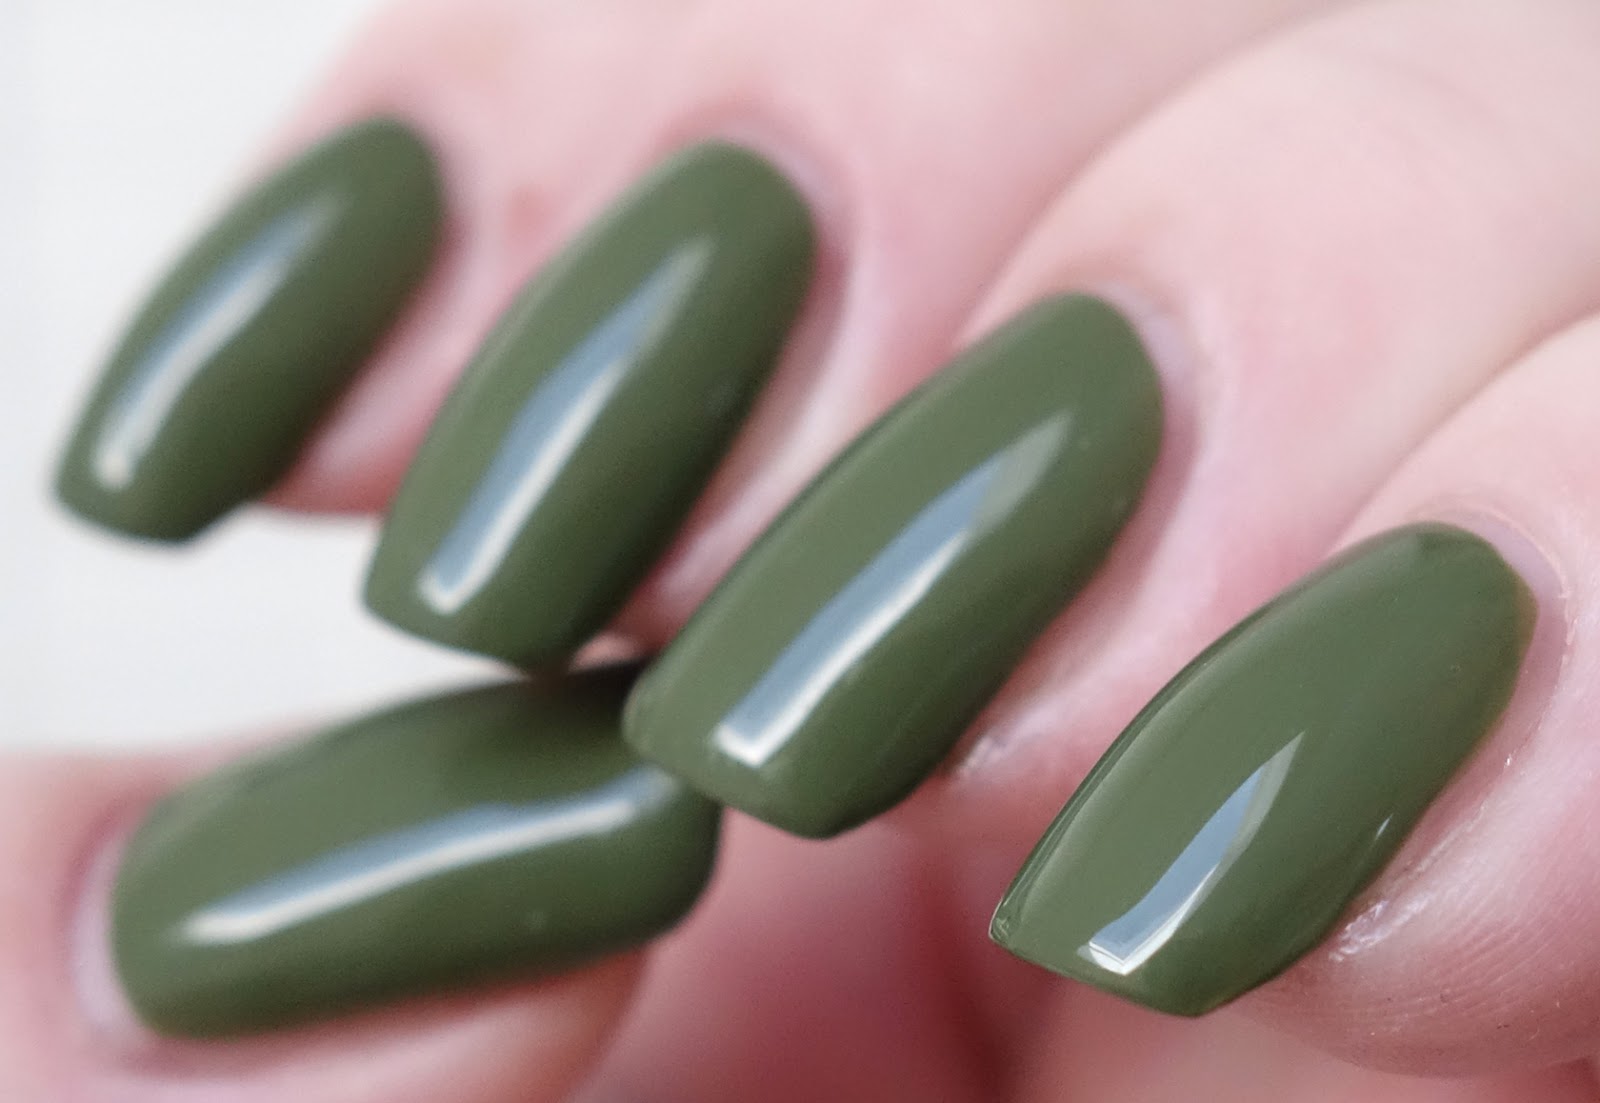 2. "Olive for Green" by OPI - wide 6